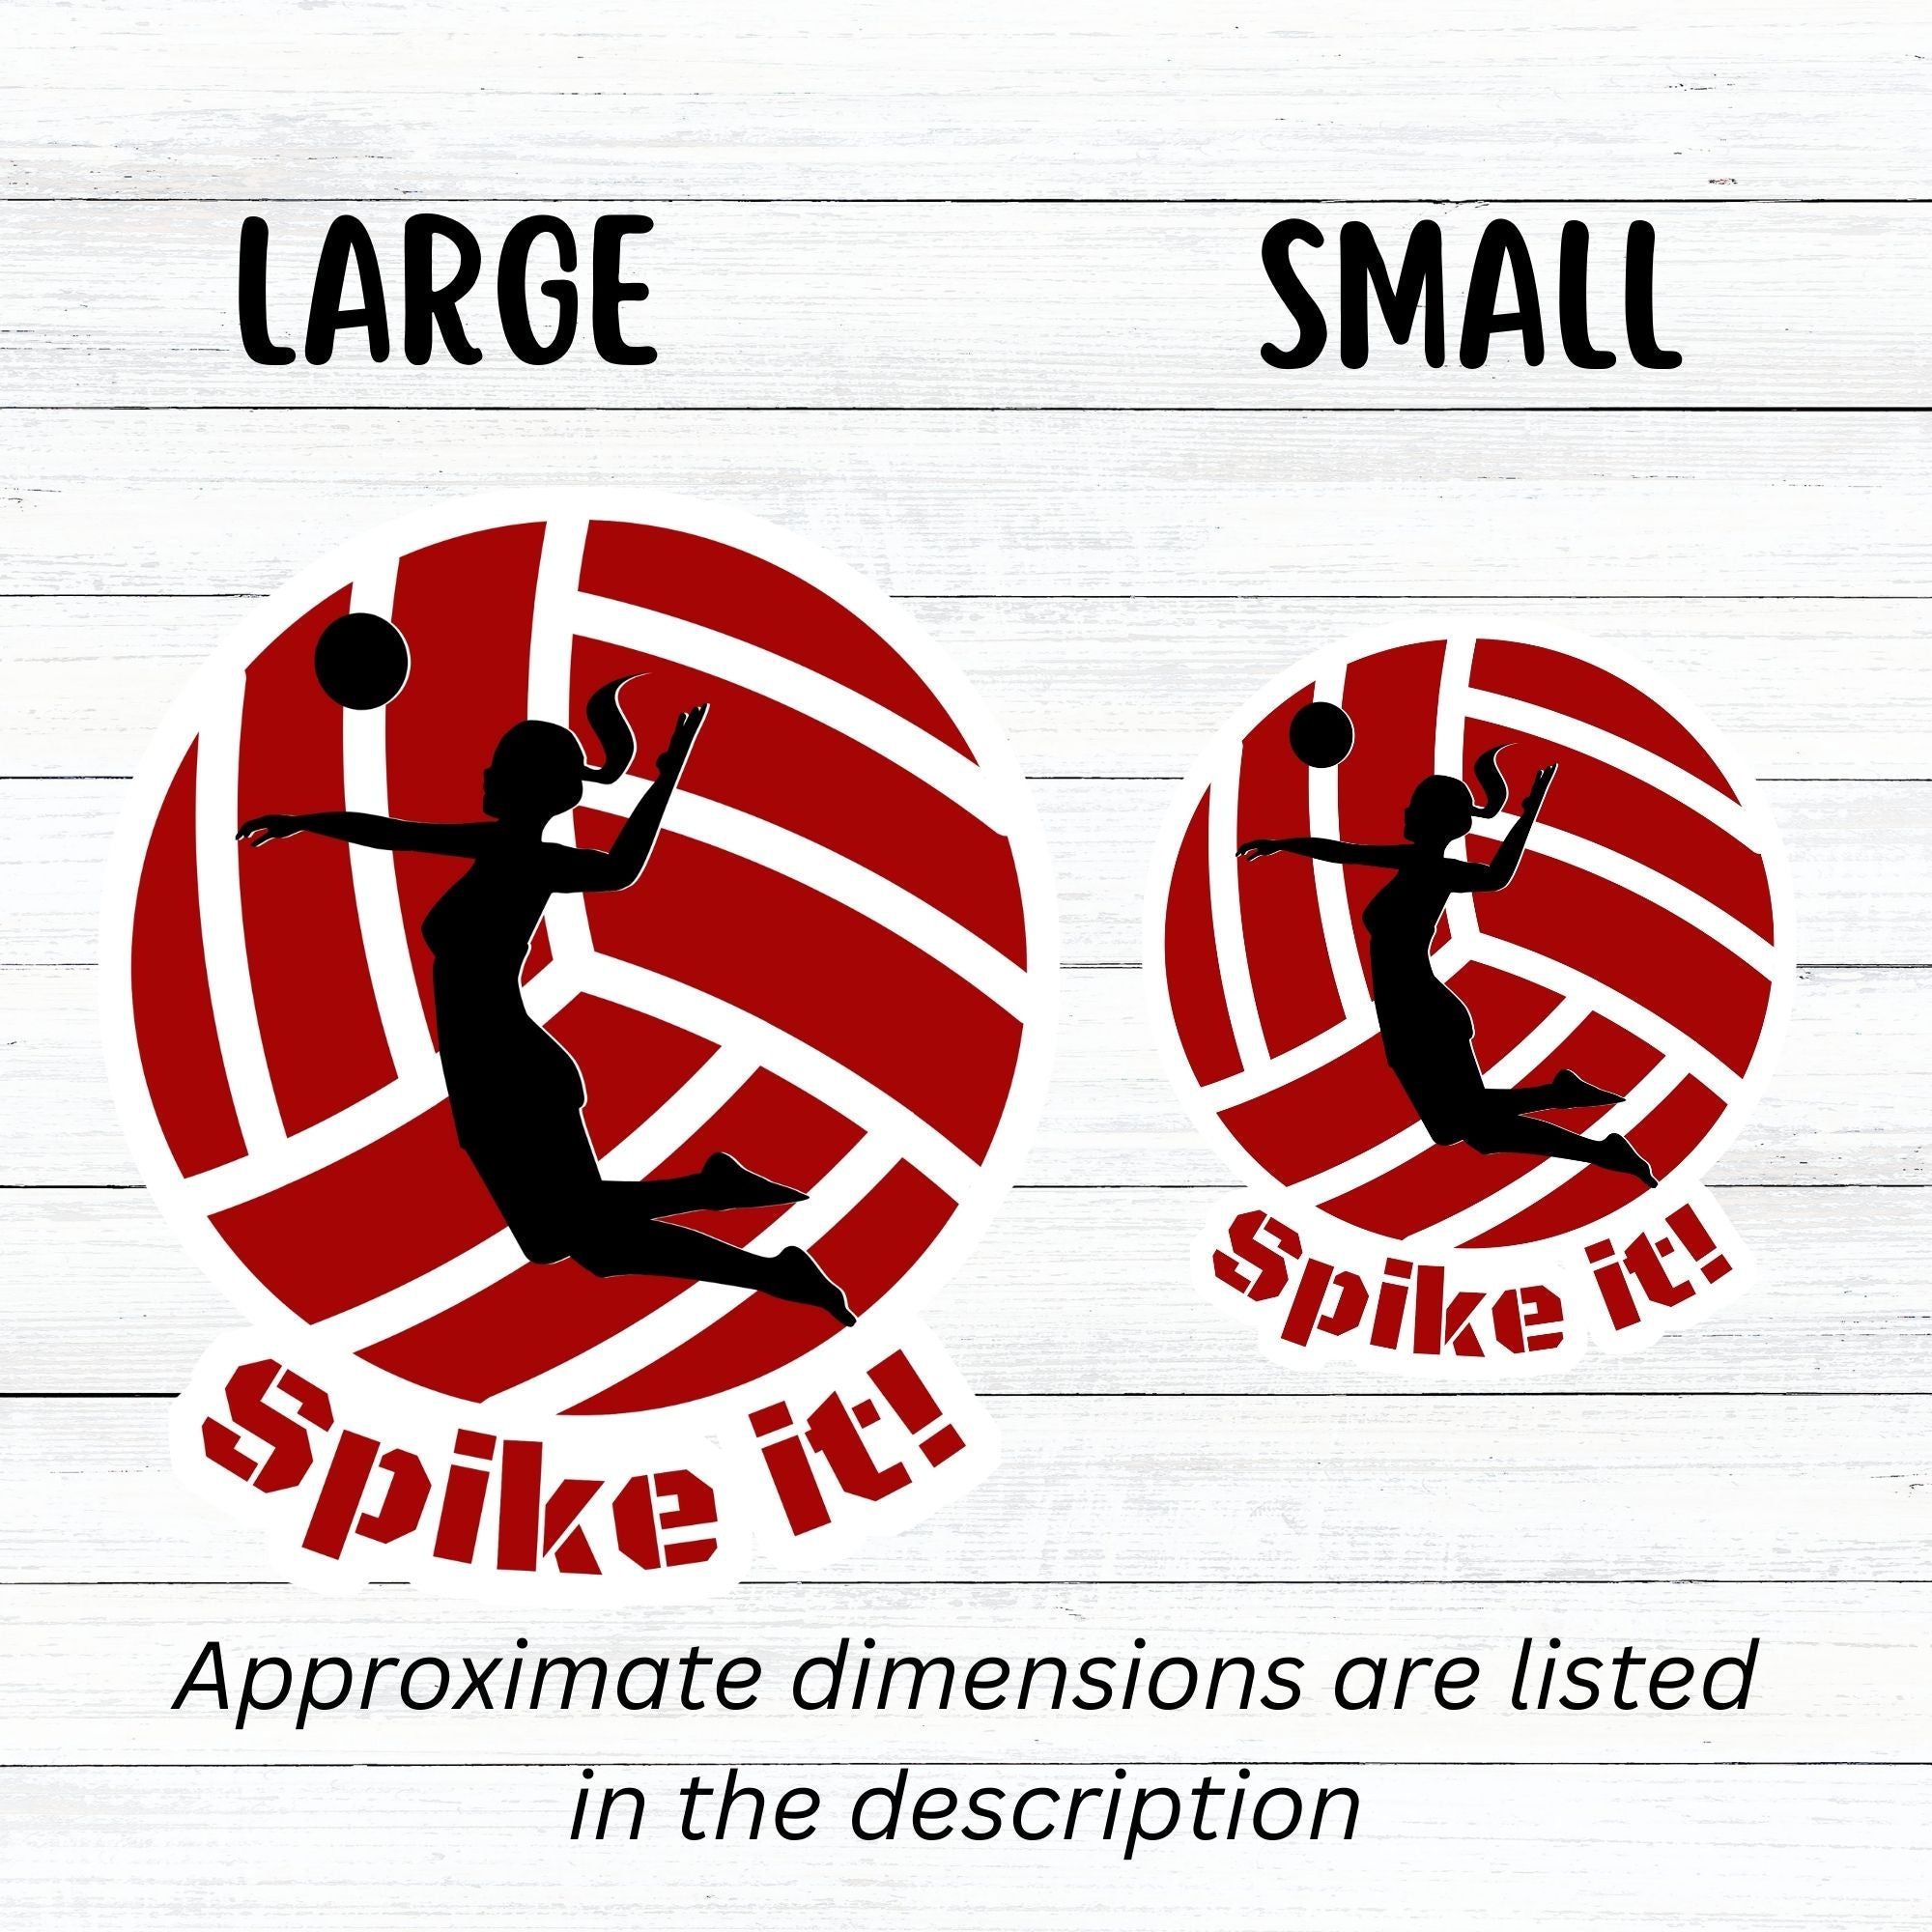 Show your love of volleyball with this individual die-cut sticker! This sticker shows the silhouette of a player with a ponytail about to spike the ball, on a maroon and white volleyball background, with the words "Spike it!" below. This image shows large and small volleyball stickers next to each other.